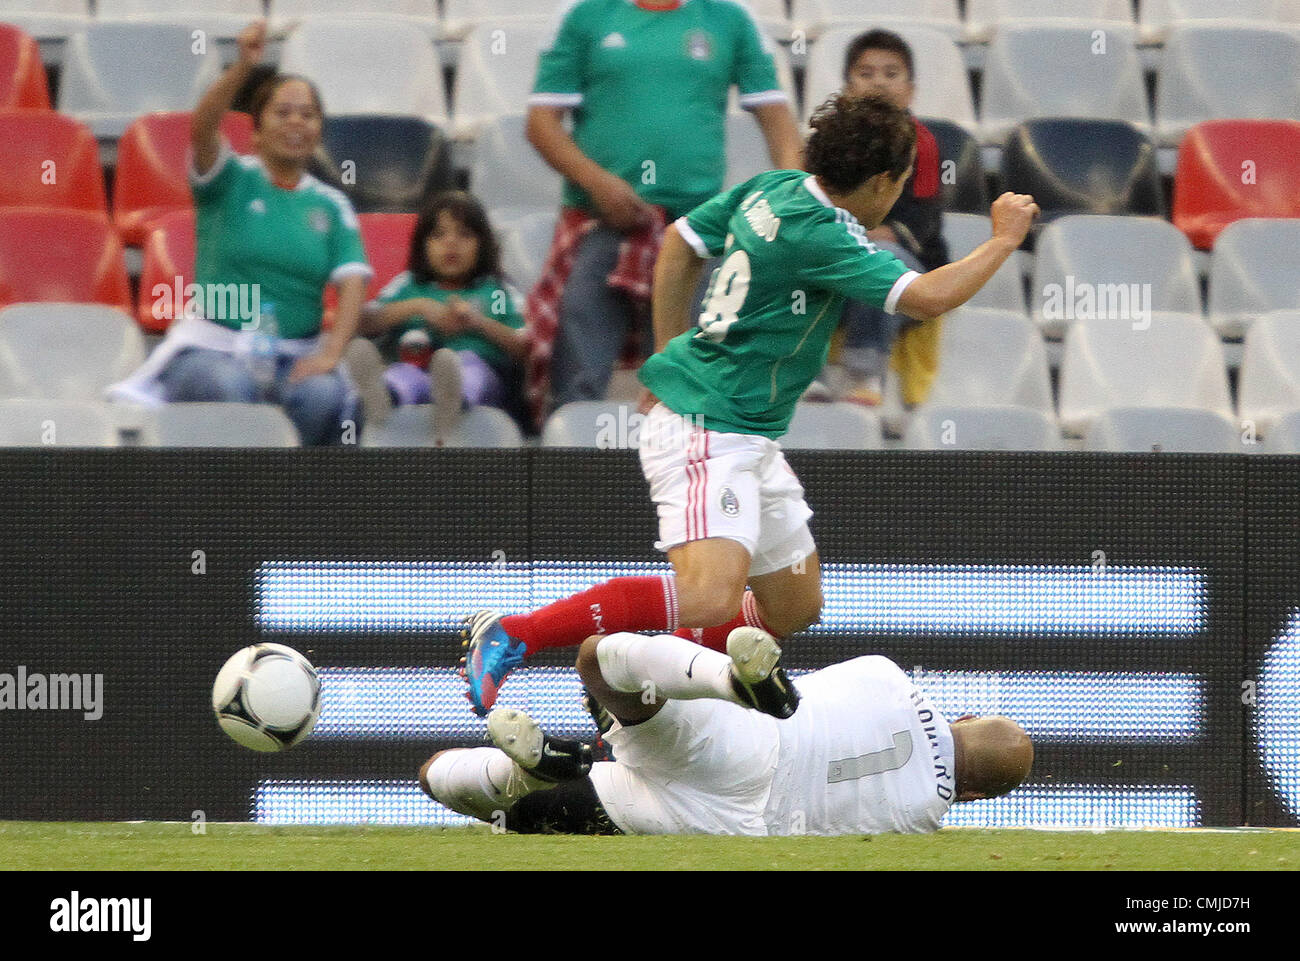 15th Aug 2012. 15.08.2012. Mexico City. Mexico.  Tim Howard (USA) (1) tackles the ball away from Andres Guardado (MEX) (18). The United States Men's National Team defeated the Mexico Men's National Team 1-0 at Estadio Azteca in Mexico City, Mexico in an international friendly soccer match. © Action Plus Sports Images / Alamy Live News Stock Photo